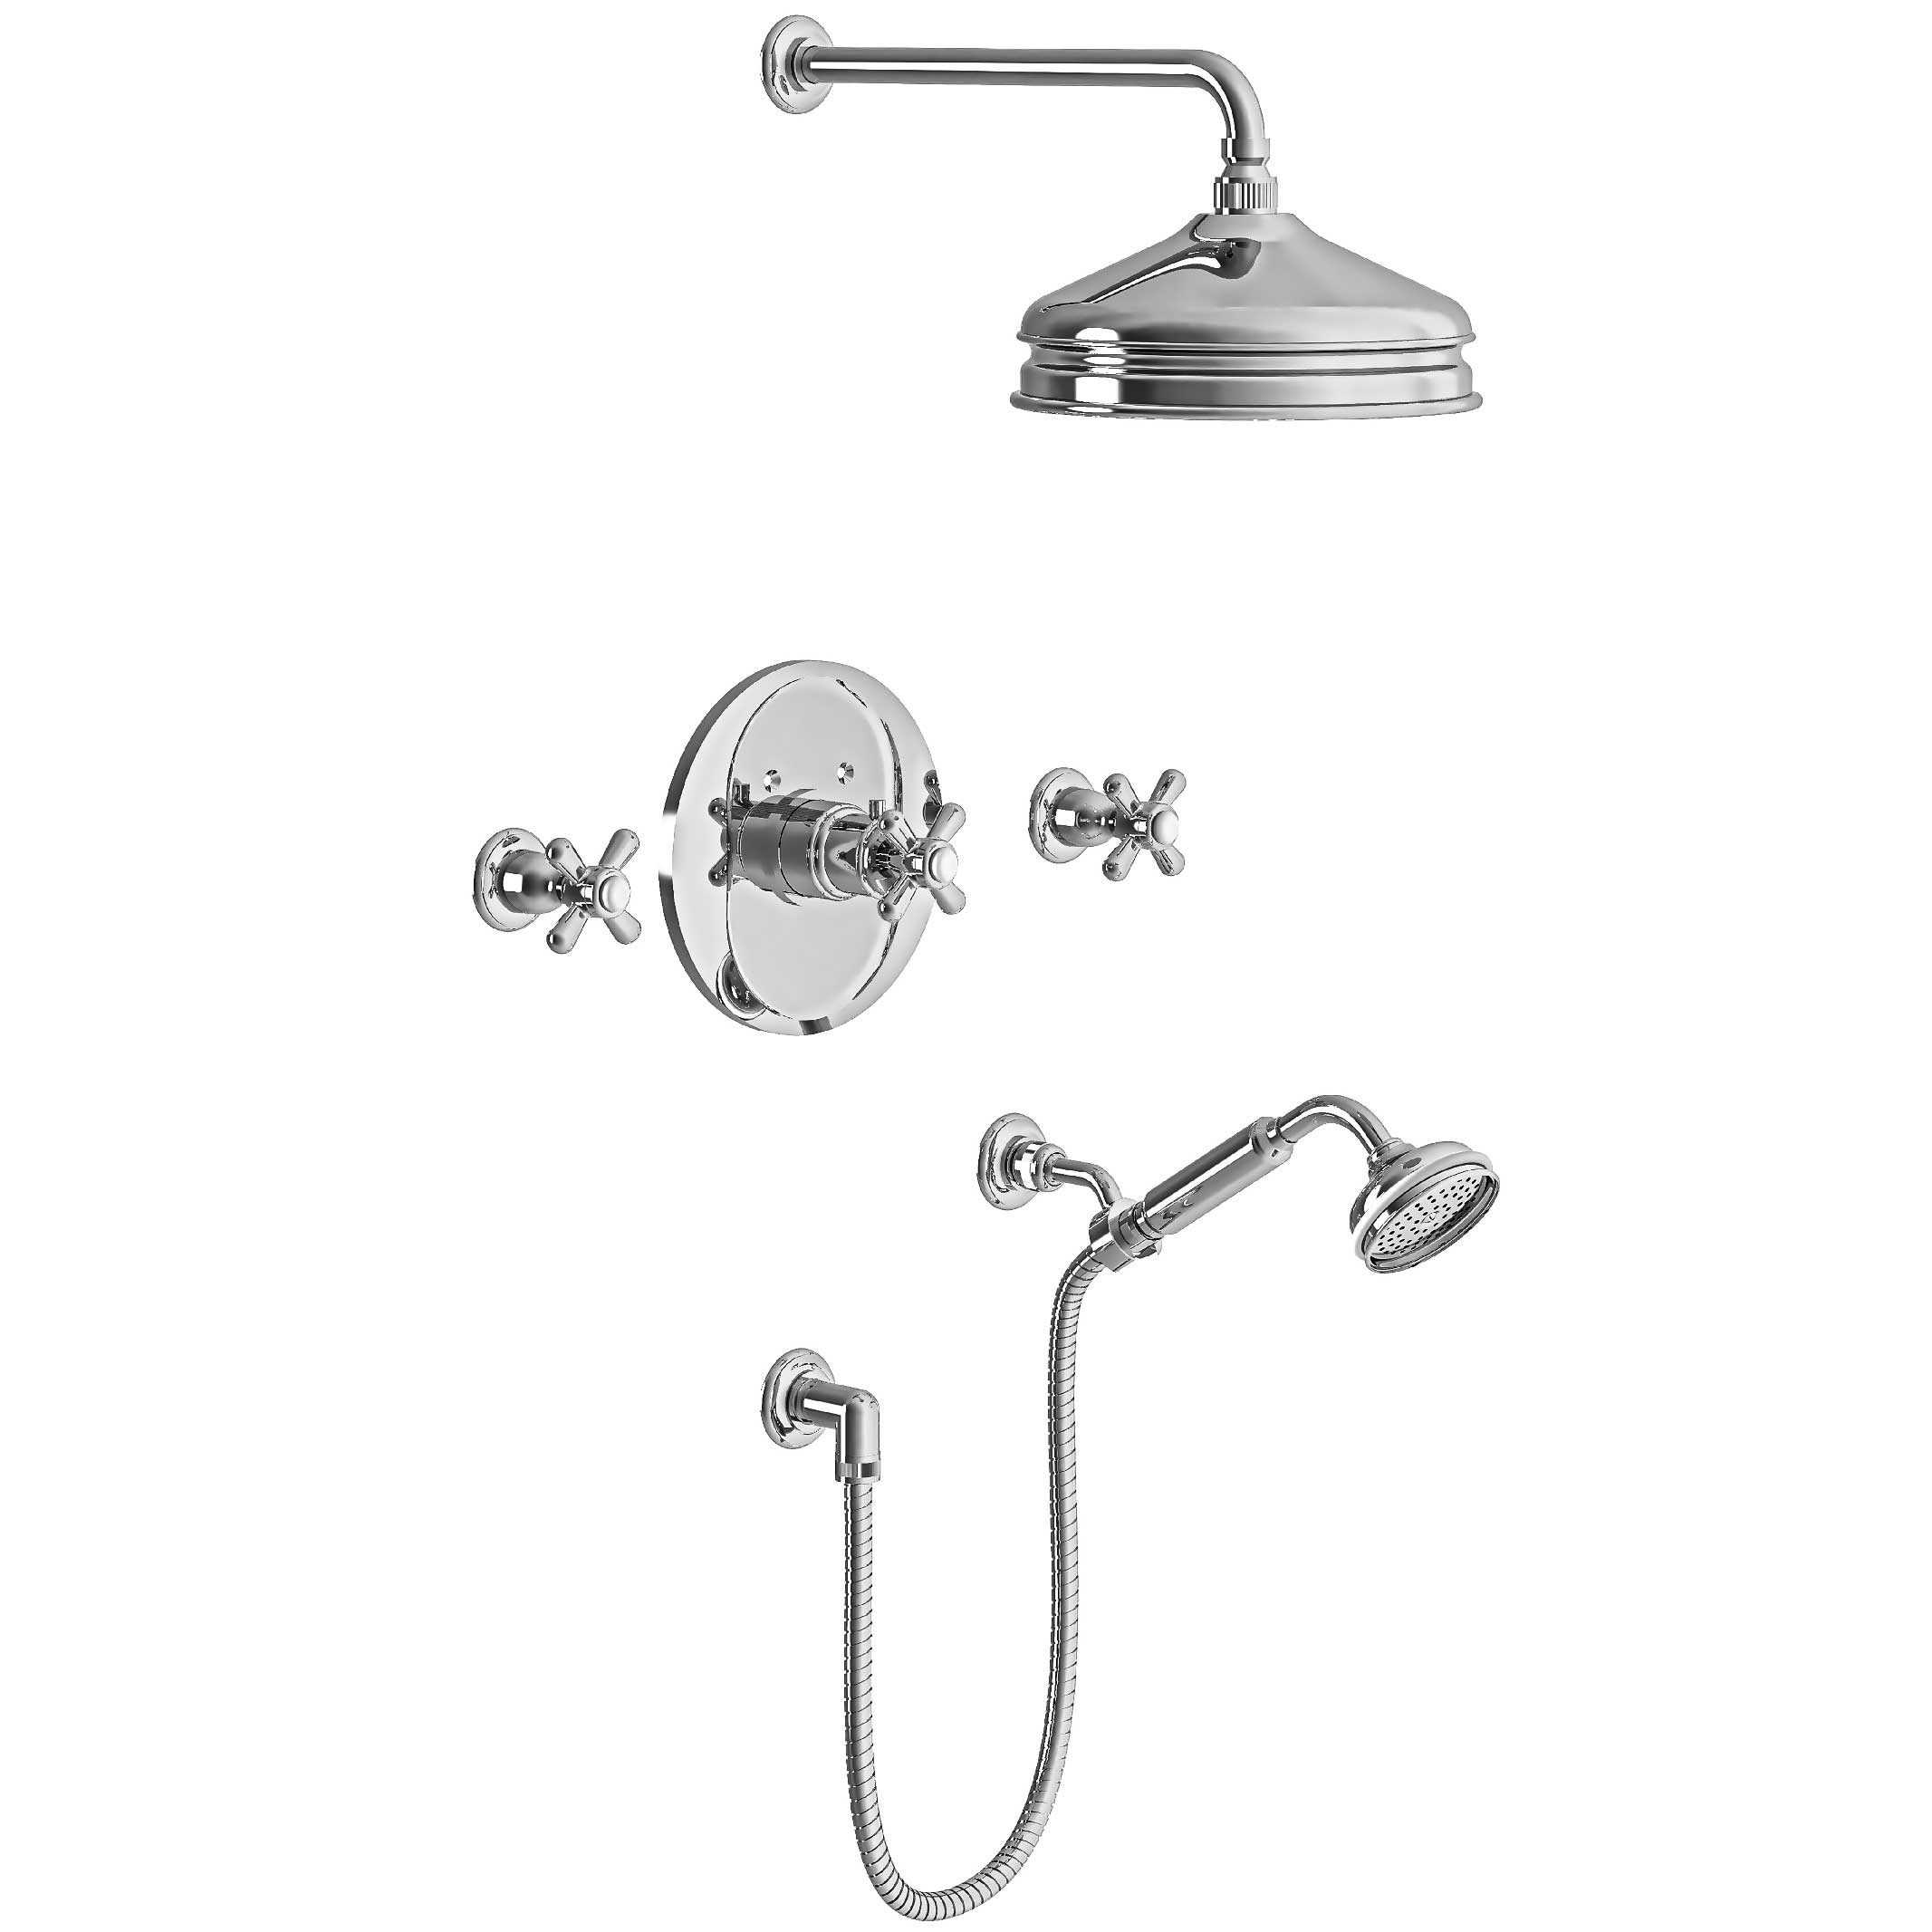 M40-2308T1 Thermostatic shower mixer package